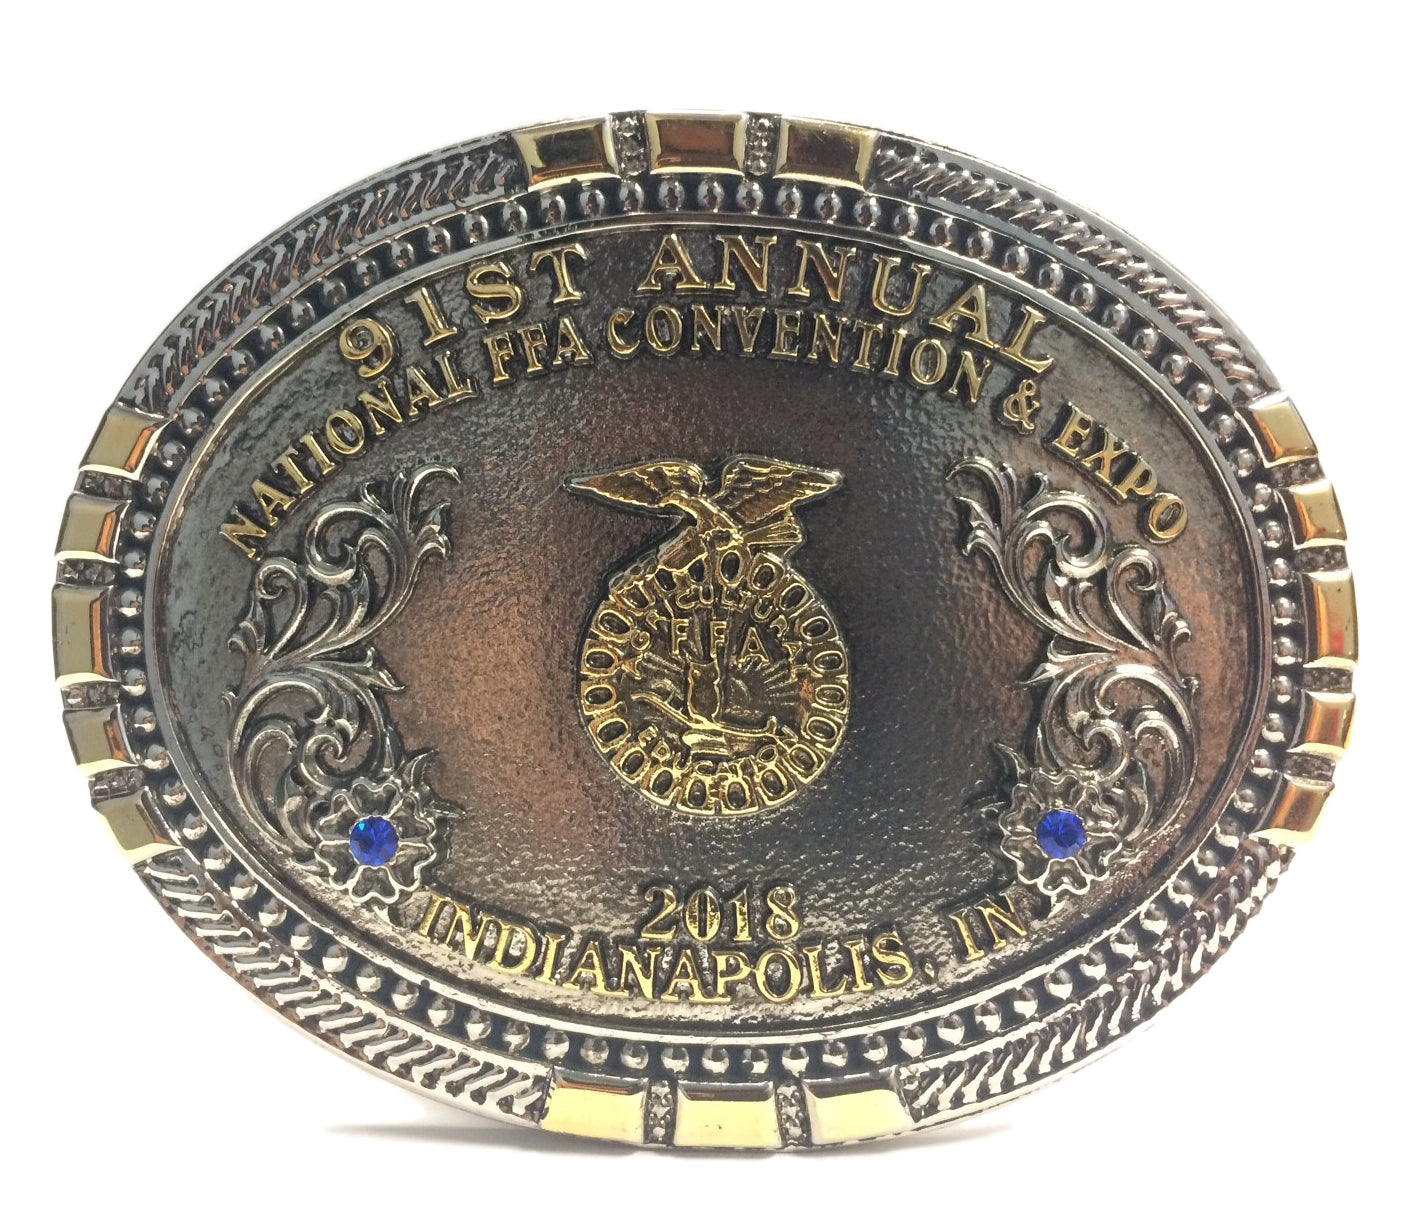 2018 91st Annual National FFA Convention Belt Buckle